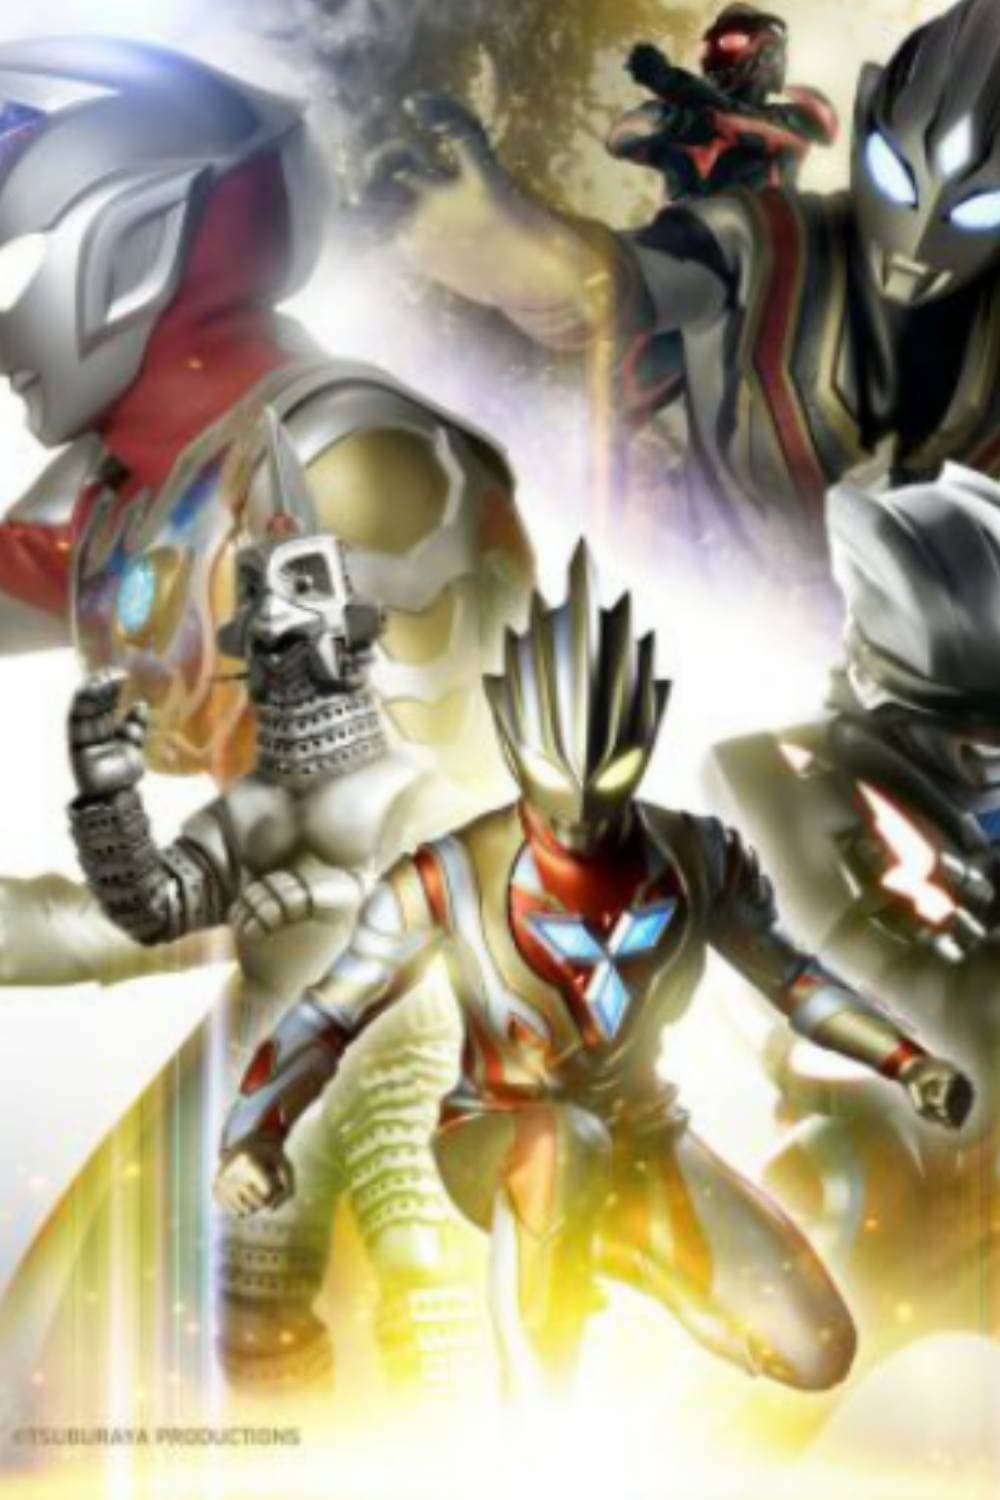 Ultraman Connection Presents: Tamashii Nations Special Streaming featuring Ultraman Trigger